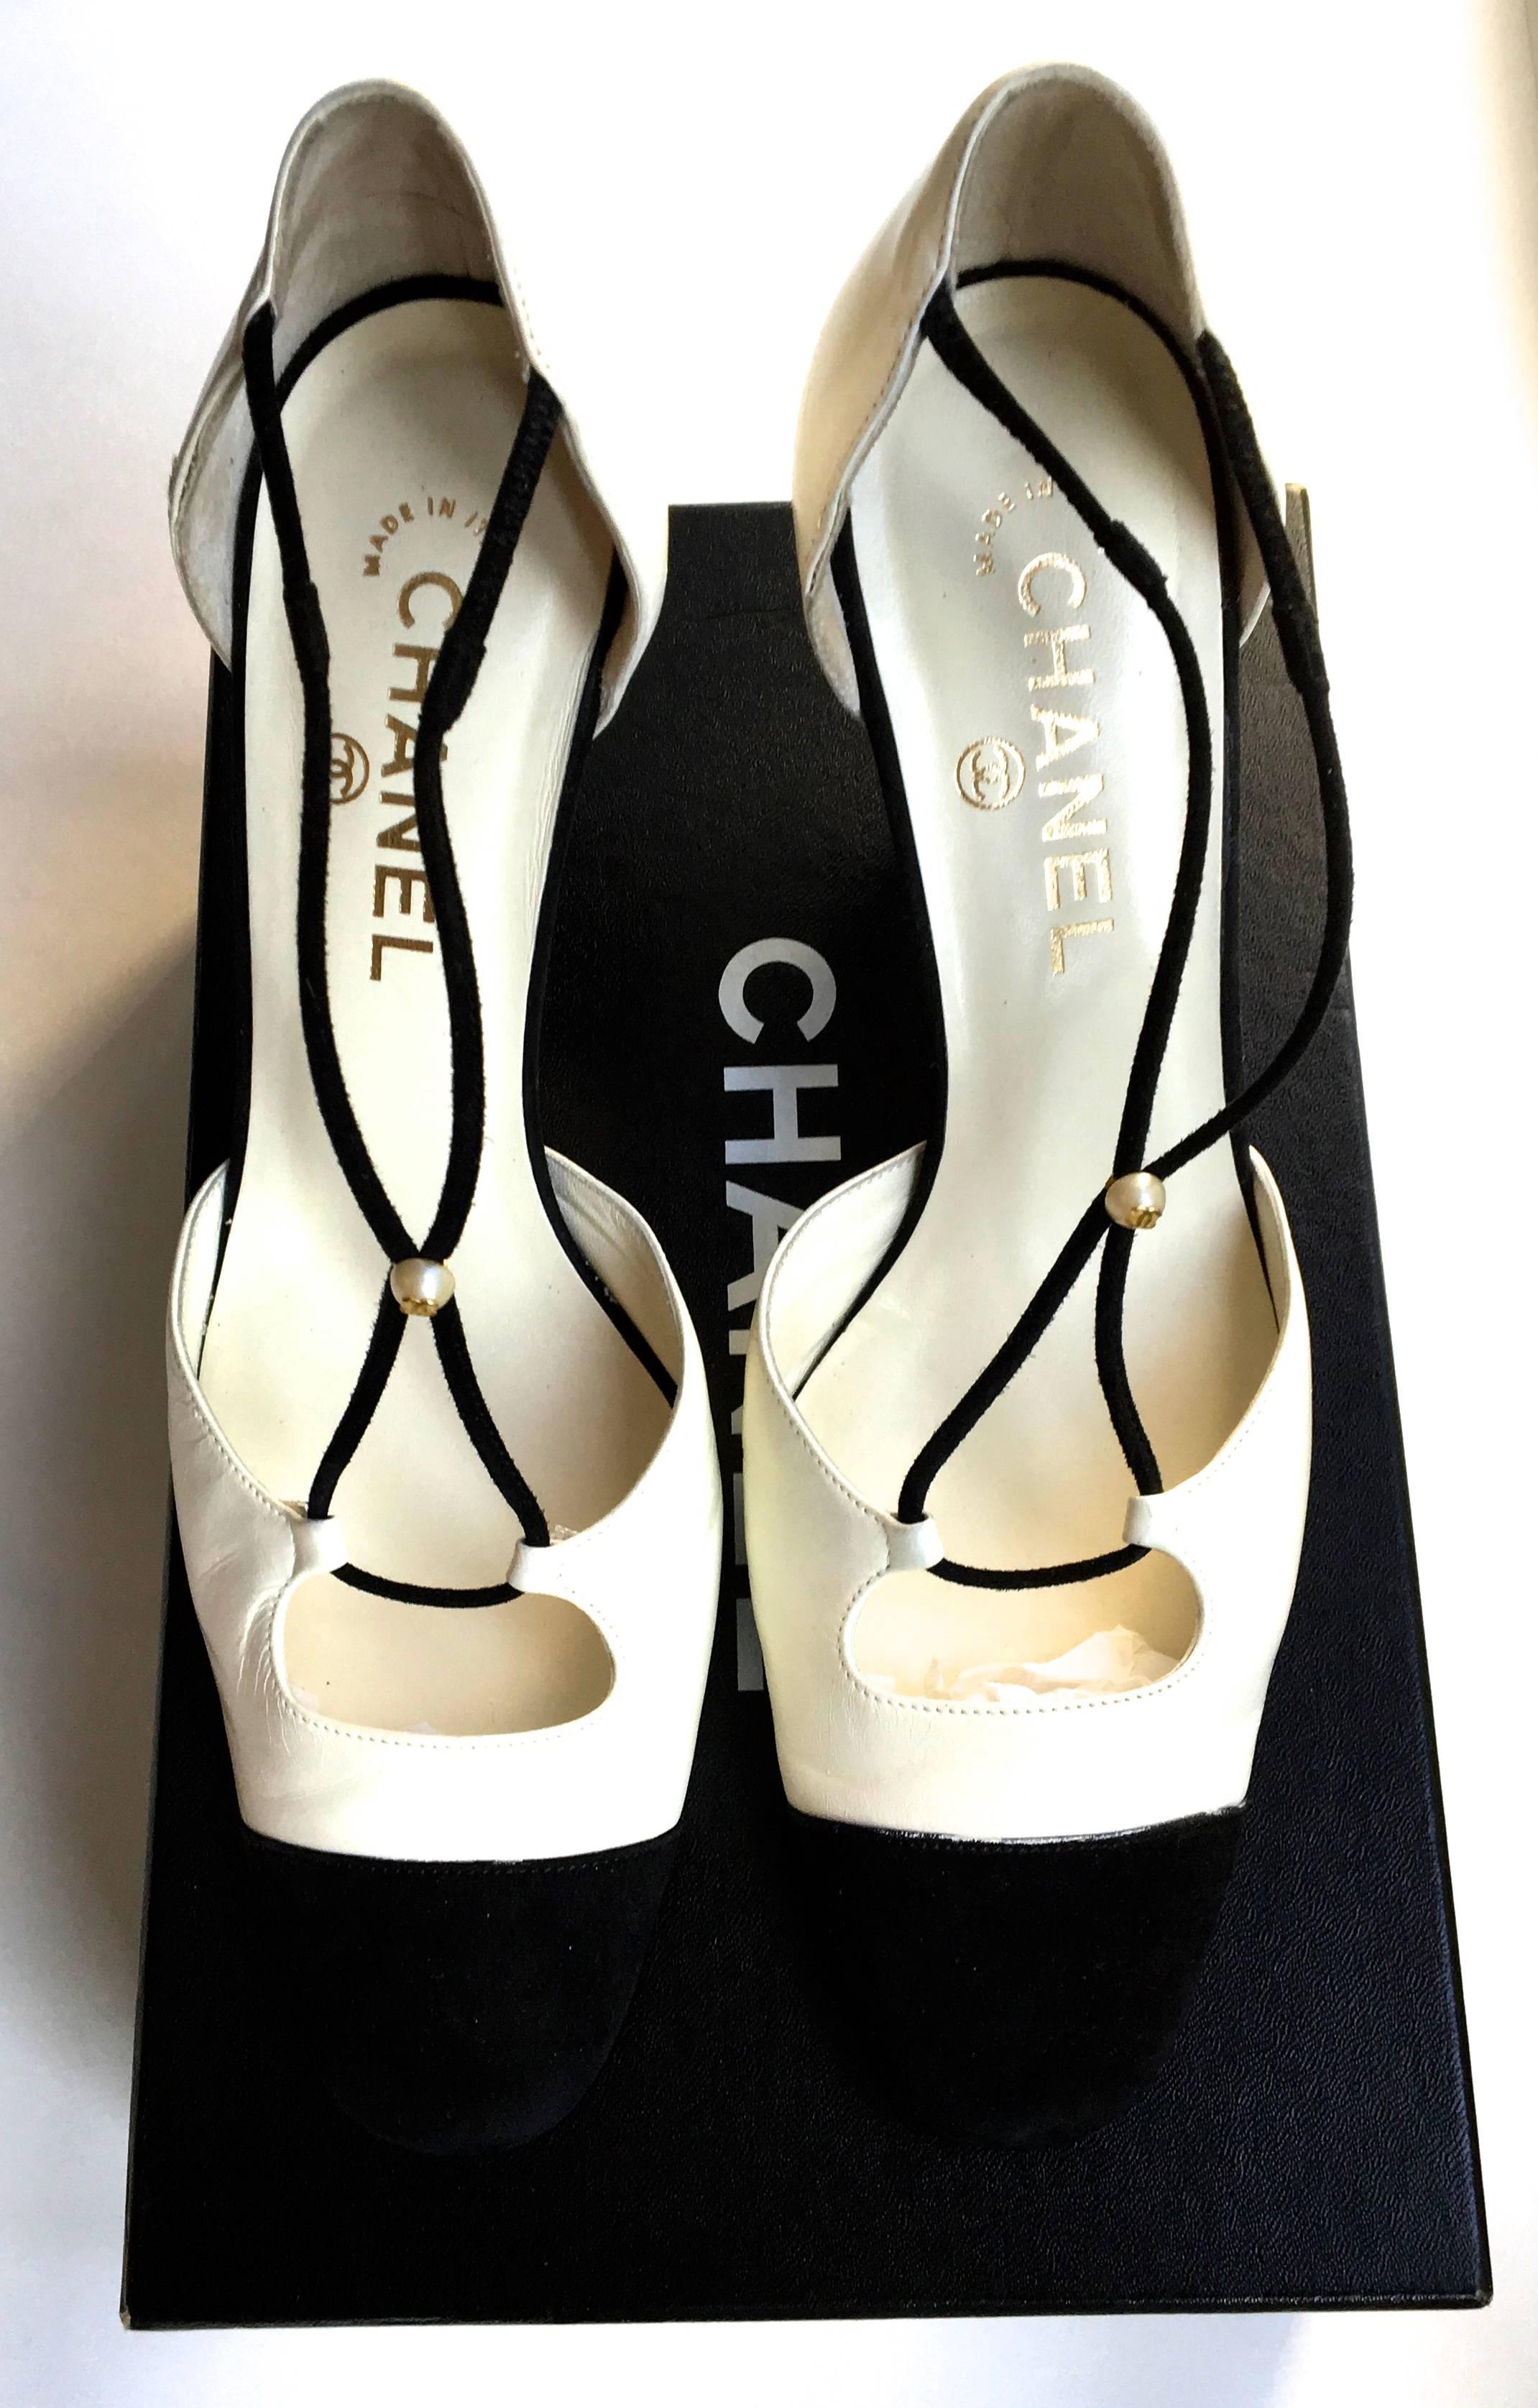 Chanel Shoes - Size 38 - Magnificent Black Suede with Creamy White Leather For Sale 3